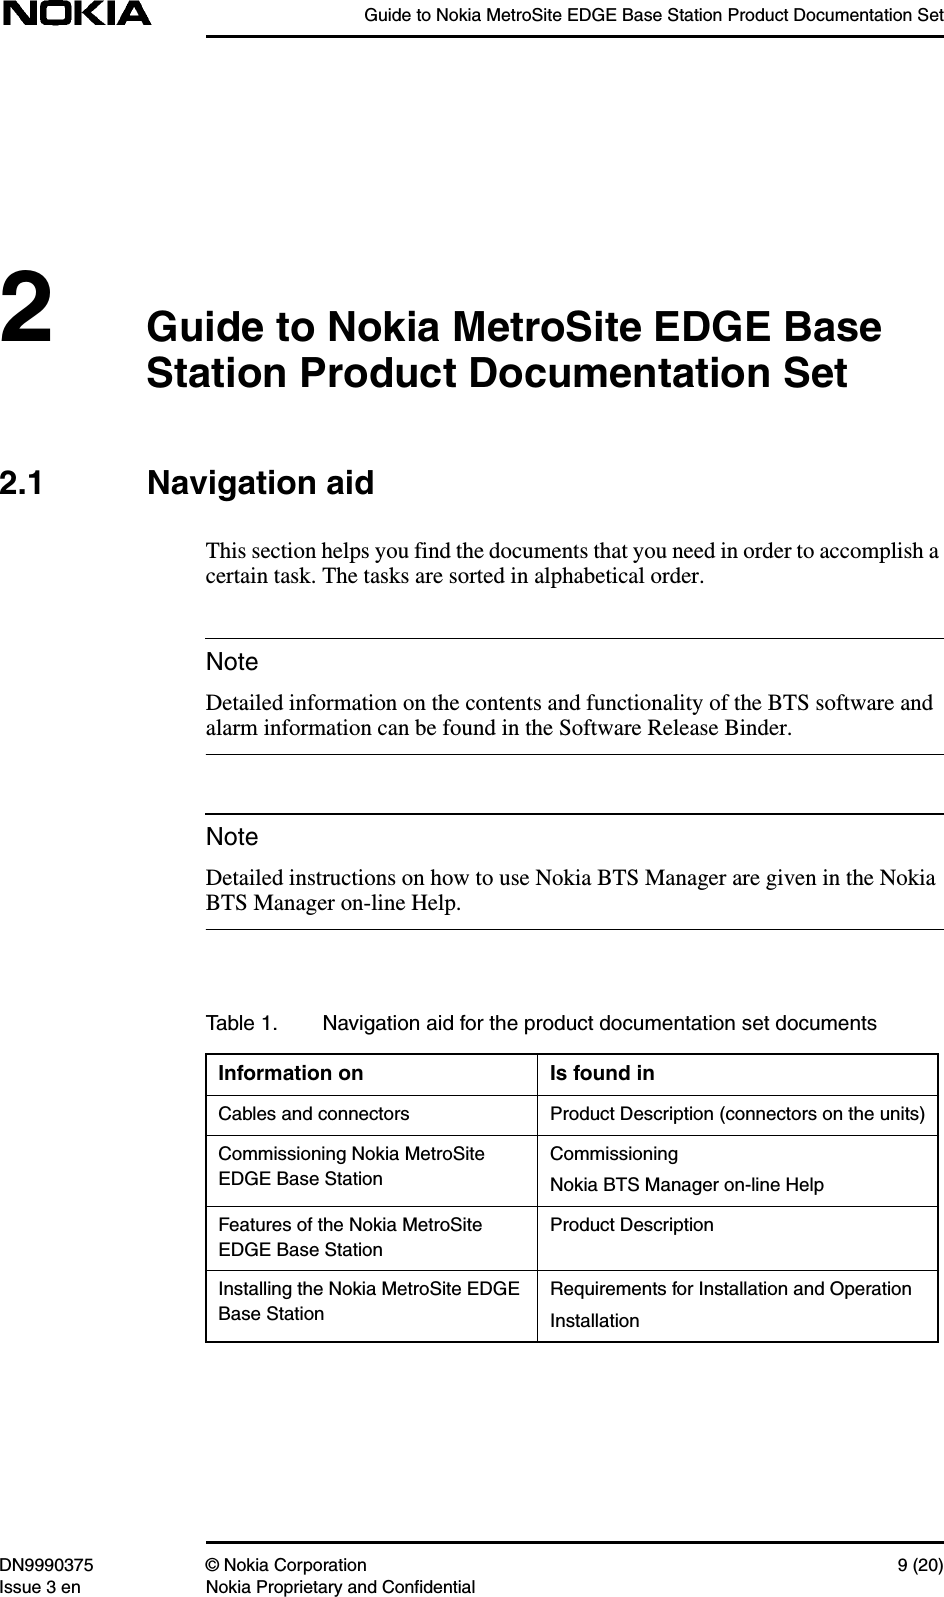 Guide to Nokia MetroSite EDGE Base Station Product Documentation SetDN9990375 © Nokia Corporation 9 (20)Issue 3 en Nokia Proprietary and ConfidentialNoteNote2Guide to Nokia MetroSite EDGE BaseStation Product Documentation Set2.1 Navigation aidThis section helps you find the documents that you need in order to accomplish acertain task. The tasks are sorted in alphabetical order.Detailed information on the contents and functionality of the BTS software andalarm information can be found in the Software Release Binder.Detailed instructions on how to use Nokia BTS Manager are given in the NokiaBTS Manager on-line Help.Table 1. Navigation aid for the product documentation set documentsInformation on Is found inCables and connectors Product Description (connectors on the units)Commissioning Nokia MetroSiteEDGE Base StationCommissioningNokia BTS Manager on-line HelpFeatures of the Nokia MetroSiteEDGE Base StationProduct DescriptionInstalling the Nokia MetroSite EDGEBase StationRequirements for Installation and OperationInstallation